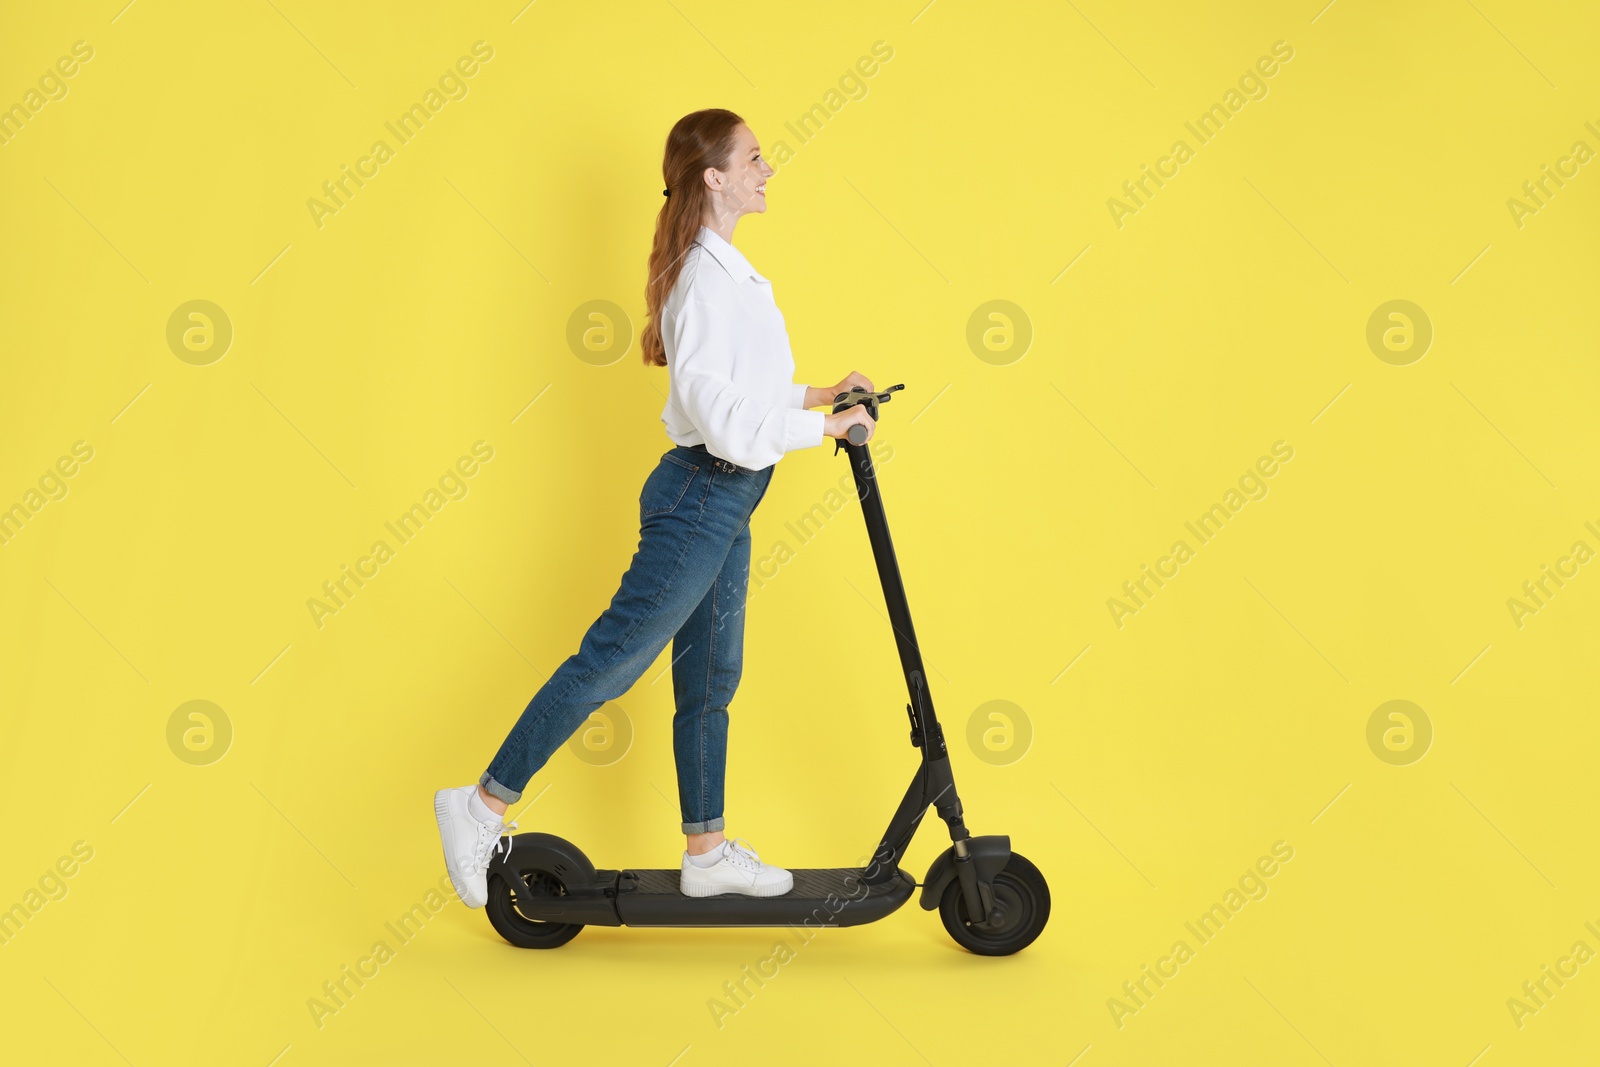 Photo of Happy woman riding modern electric kick scooter on yellow background